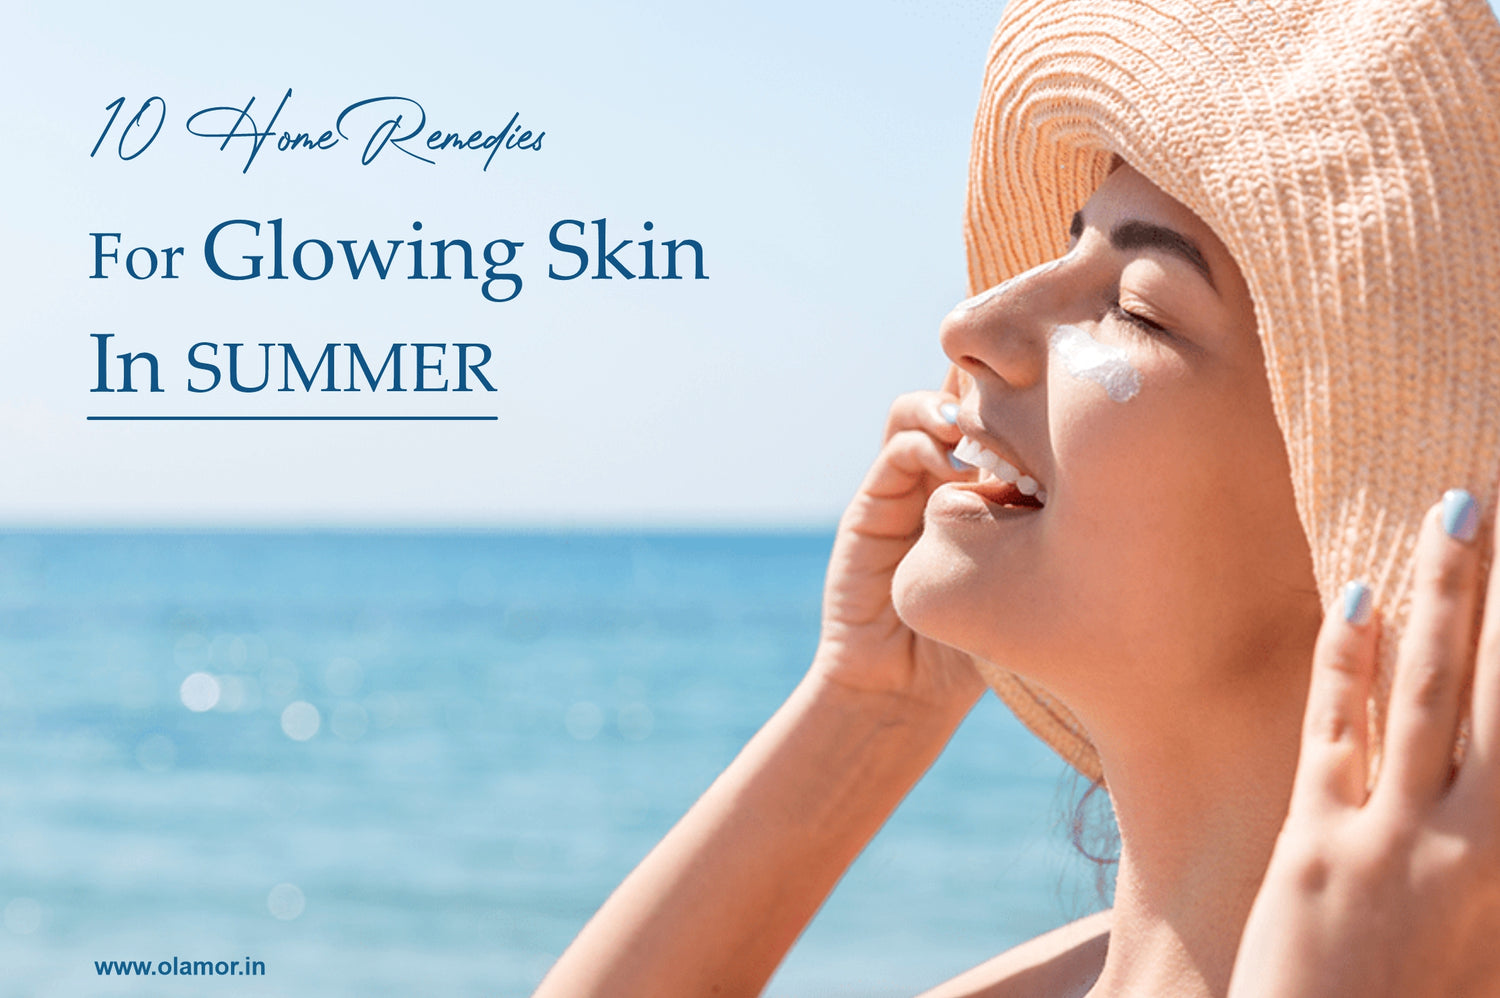 10 Home Remedies For Glowing Skin In Summer